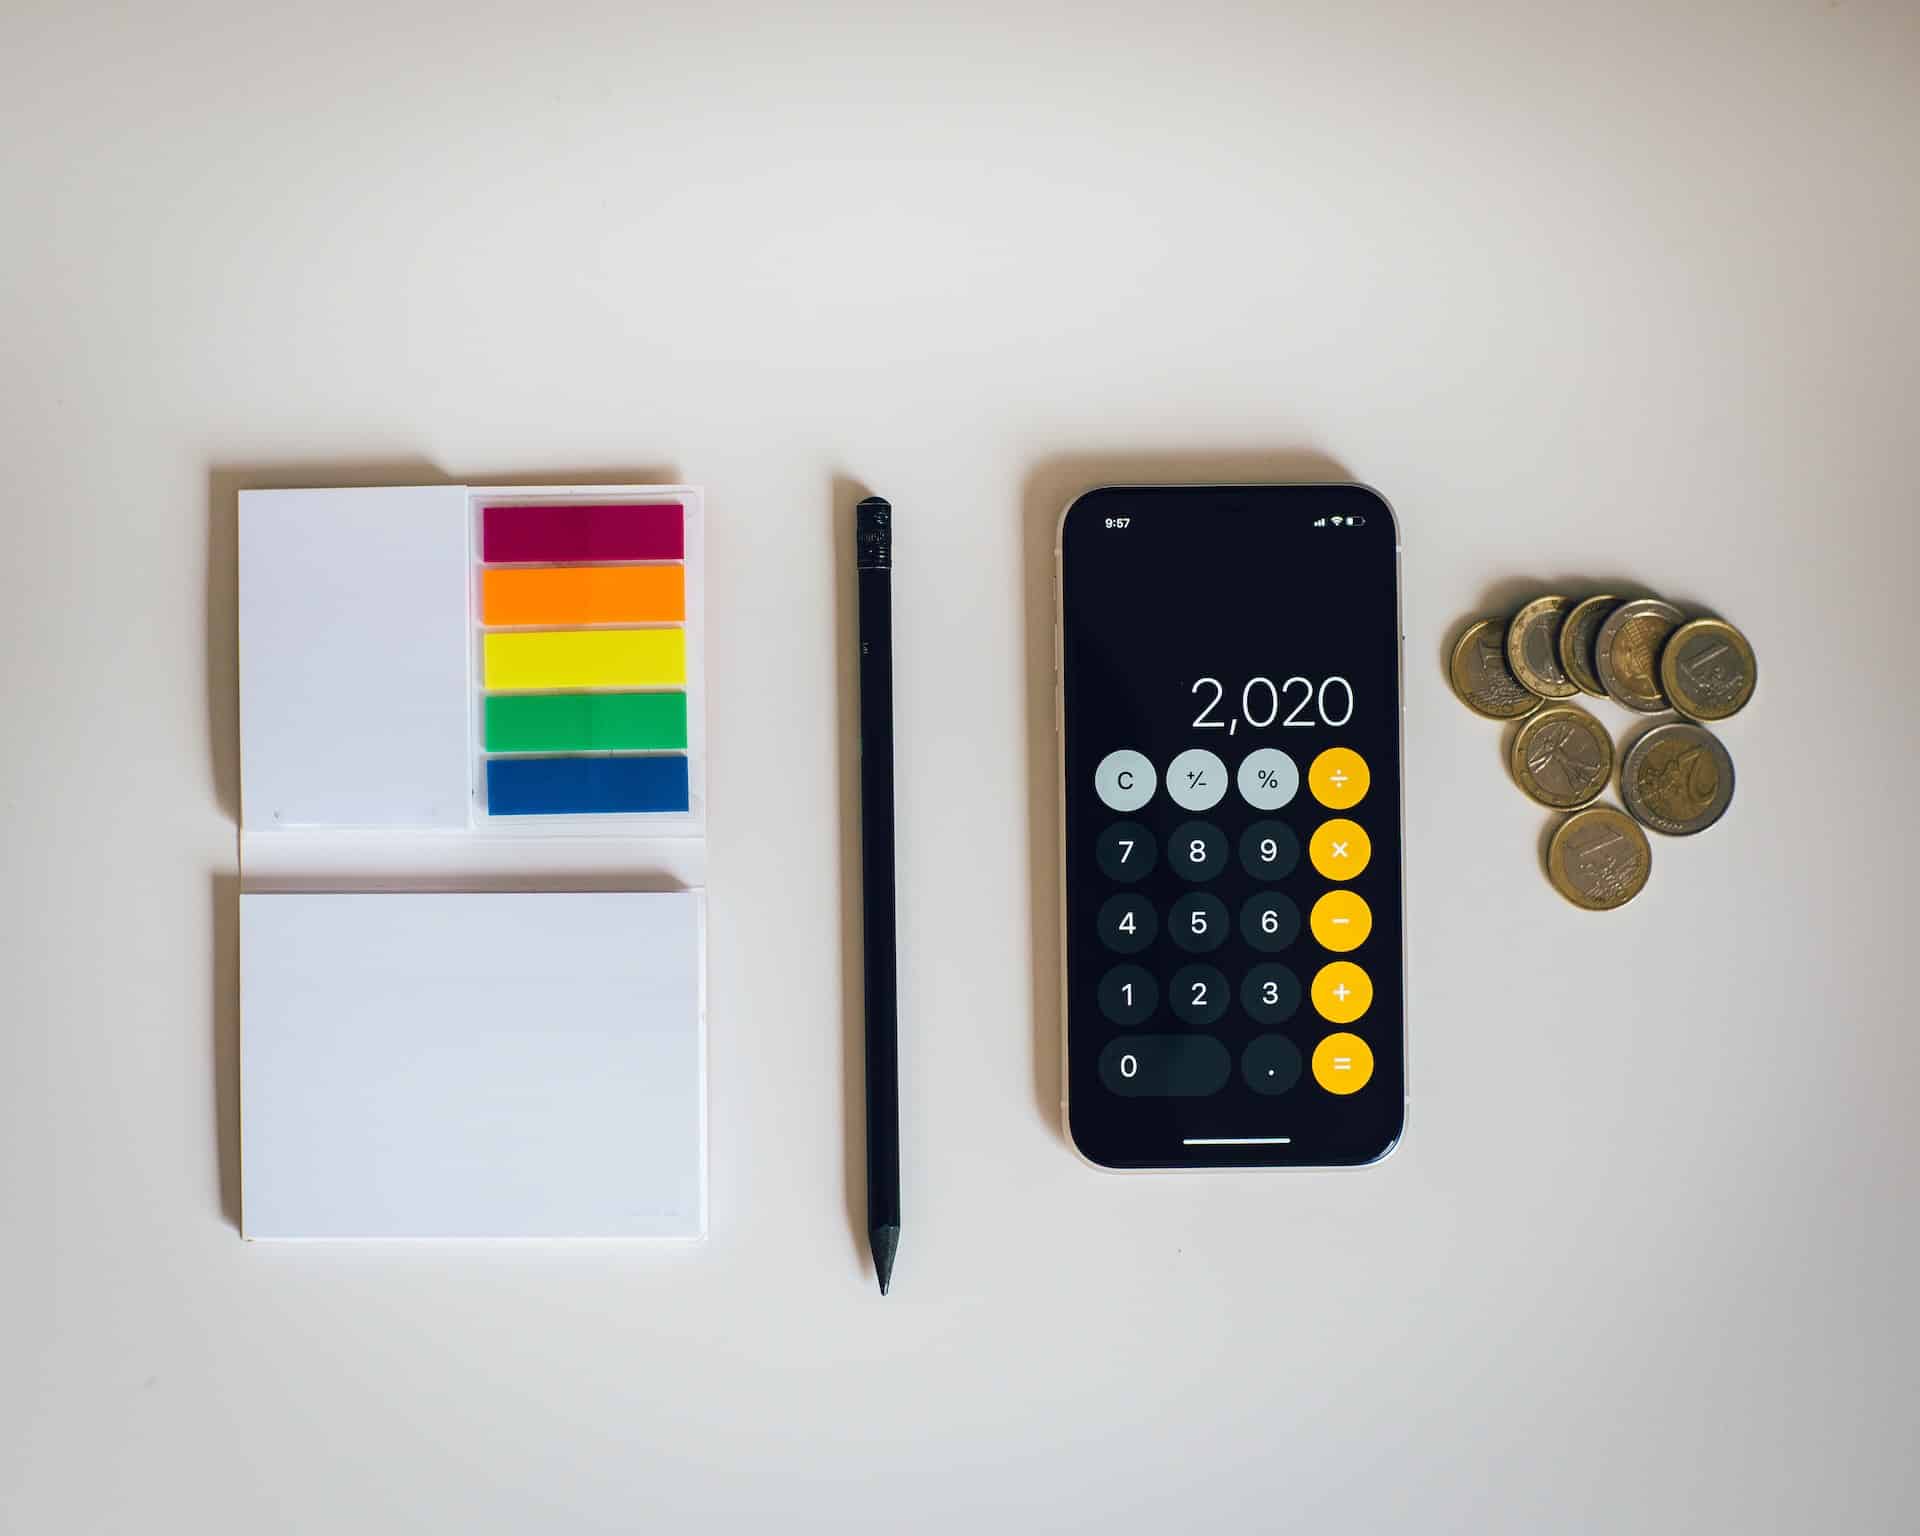 Note stickers, a pen, coins, and a smartphone on a white background.